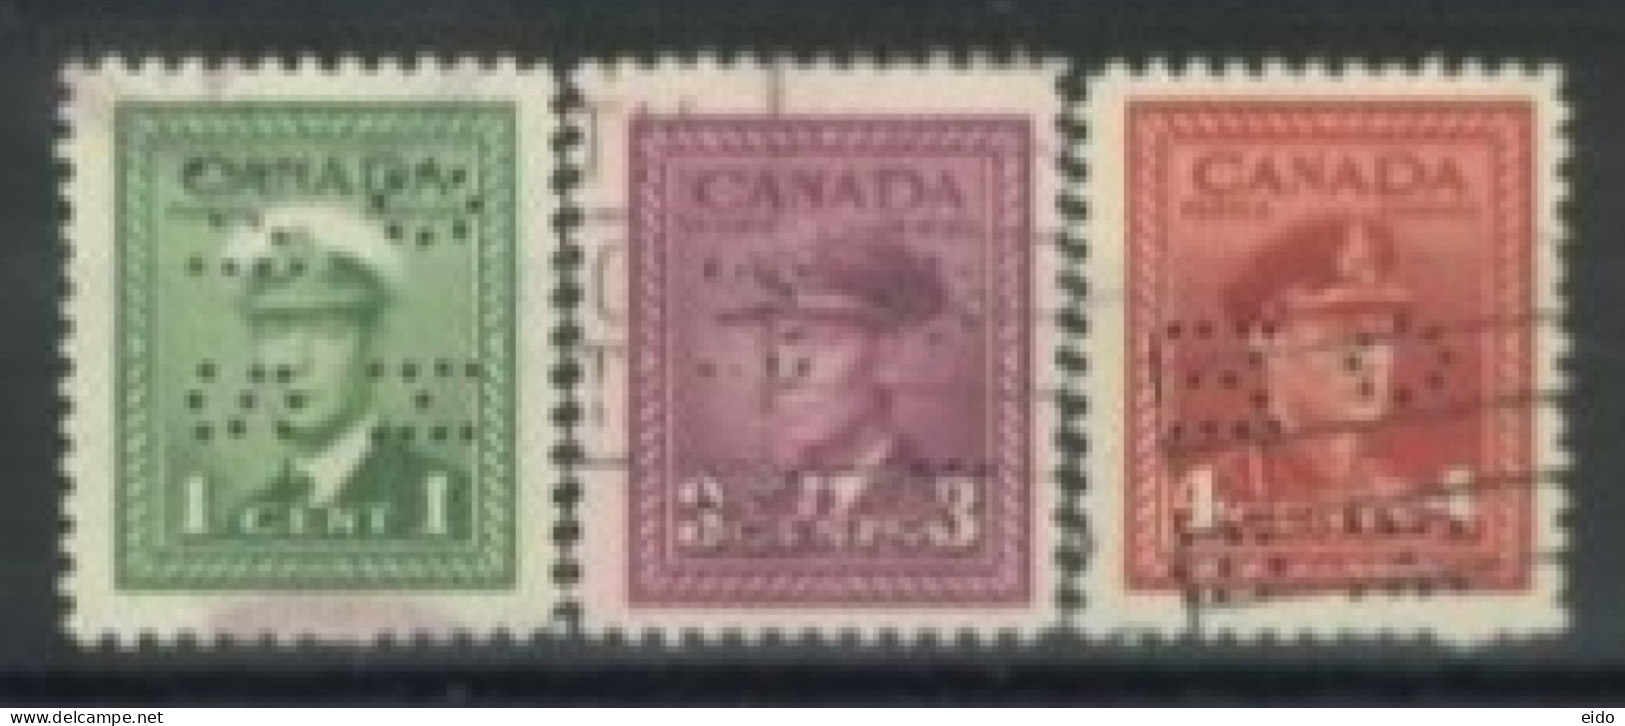 CANADA - 1942, KING GEORGE VI IN NAVAL UNIFORM STAMPS SET OF 3, USED. - Used Stamps